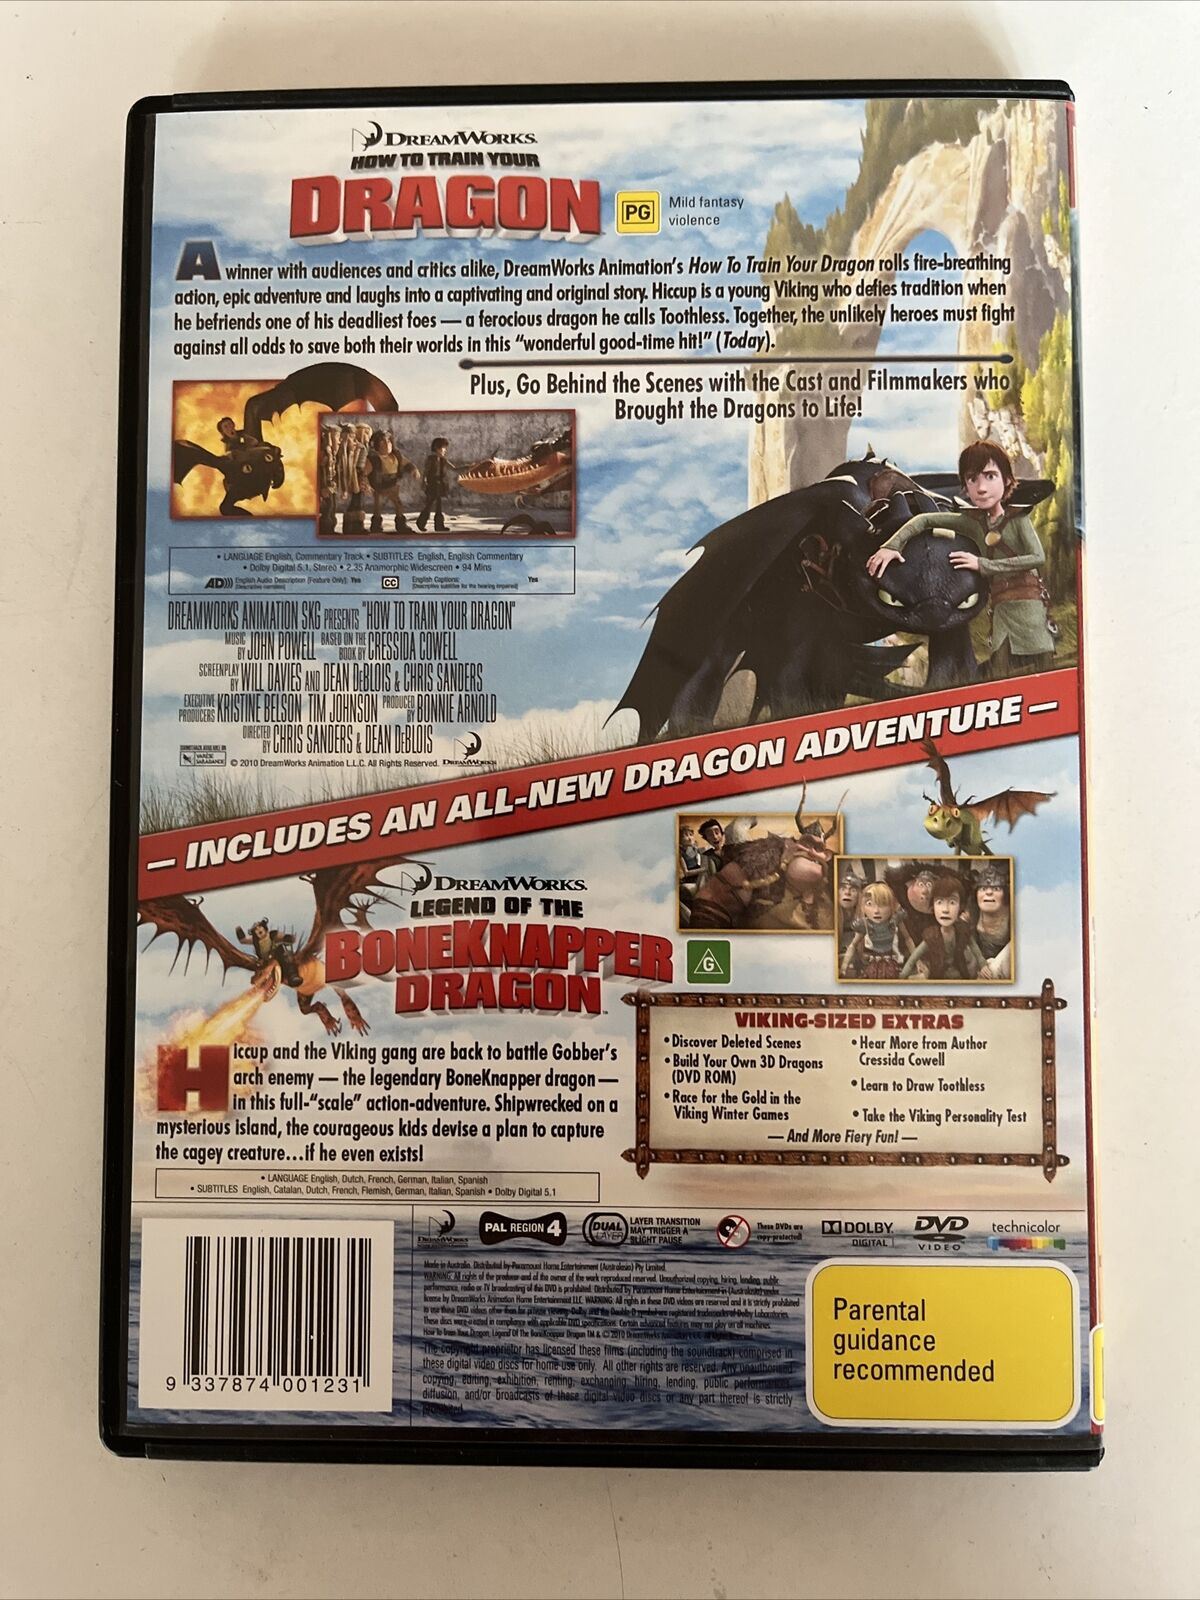 How To Train Your Dragon (DVD, 2010, 2-Disc Set) Region 4